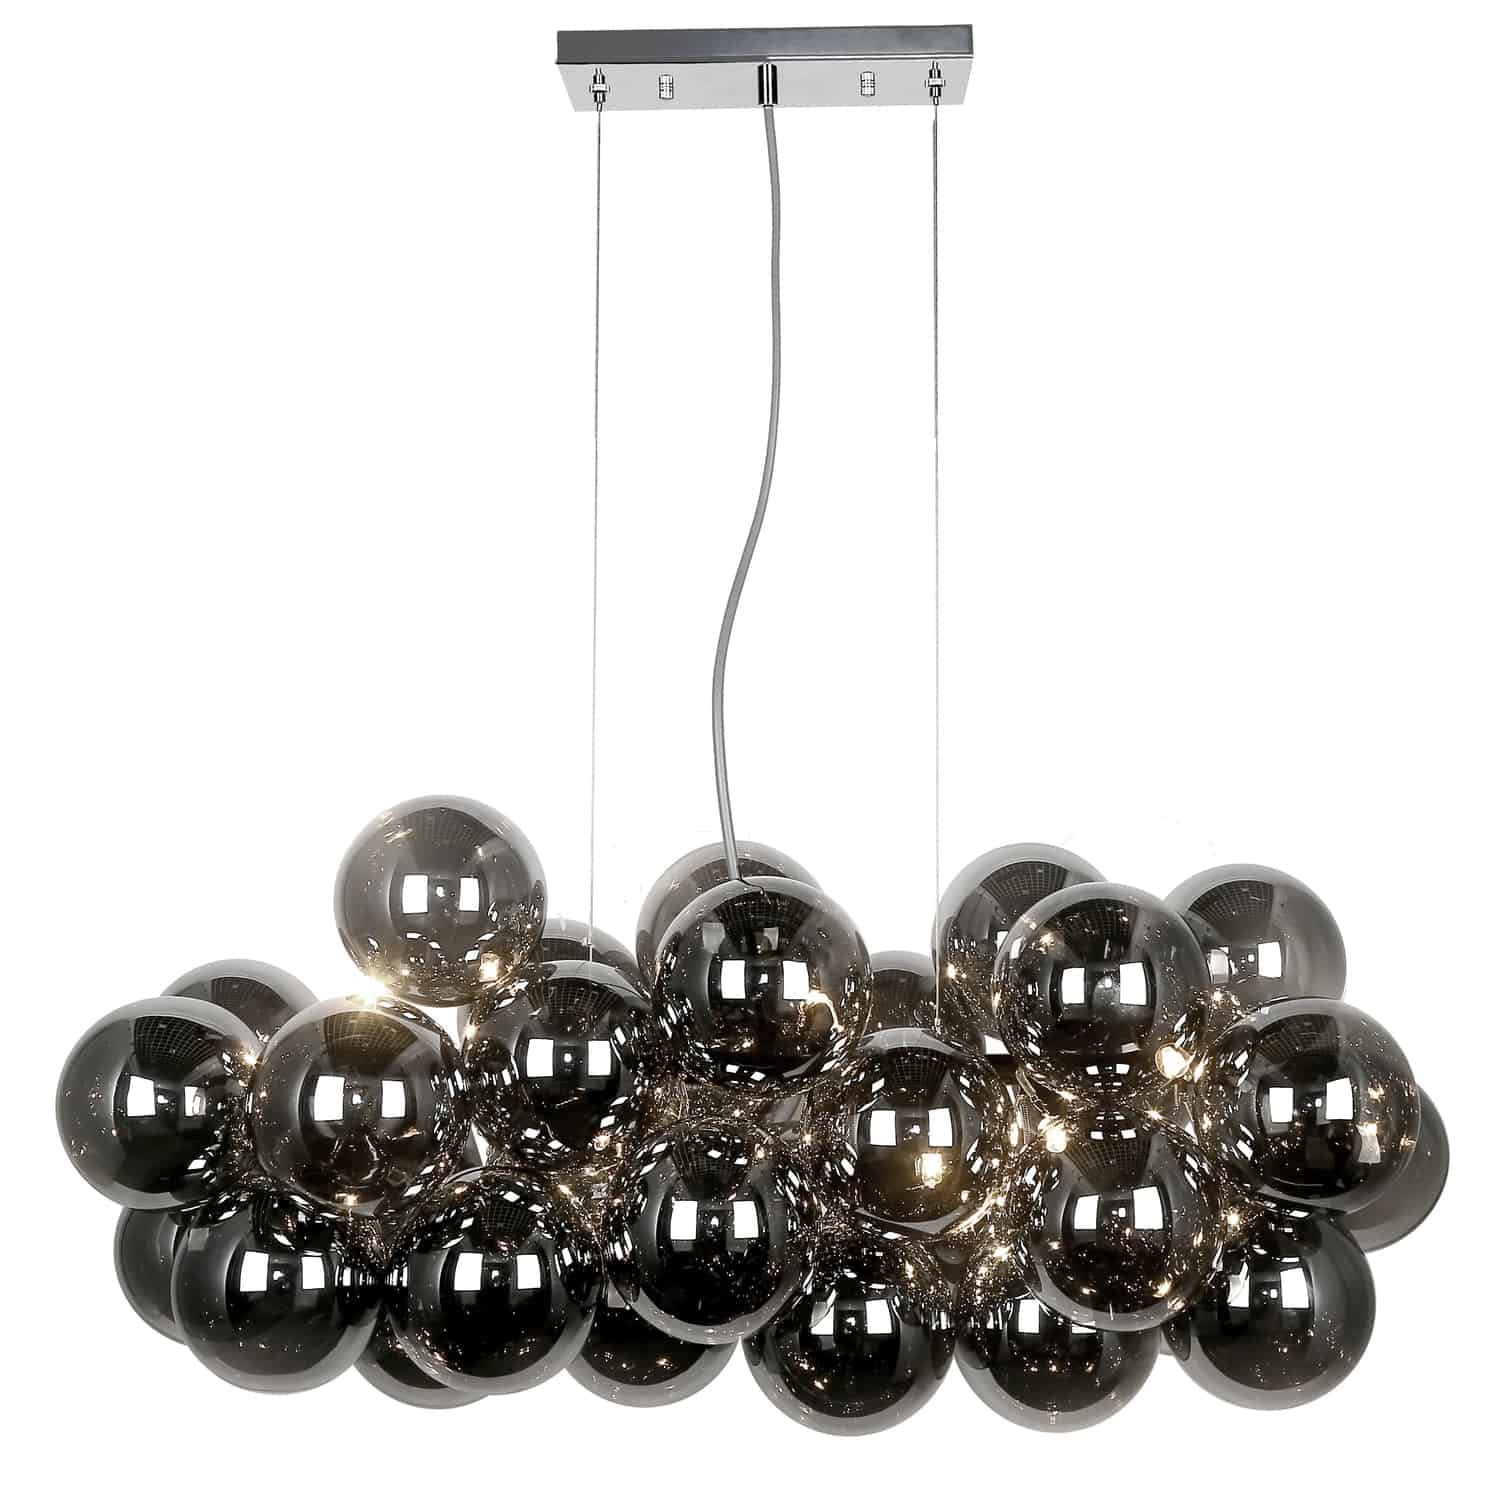 The emphasis is on the appeal of the spherical shape in the Comet family of lighting. Available in varied configurations and sizes, Colby lighting shows off your opulent sense of contemporary style.  The primary feature of each Colby light is created with glass globes that reflect and amplify the lights set within a metal frame. Clear or smoked glass, and a choice of contrasting metal finishes, complete the striking design.  It's a sure way to create textural appeal and add curves to any area of the home from hallways to main rooms like the dining room or kitchen.